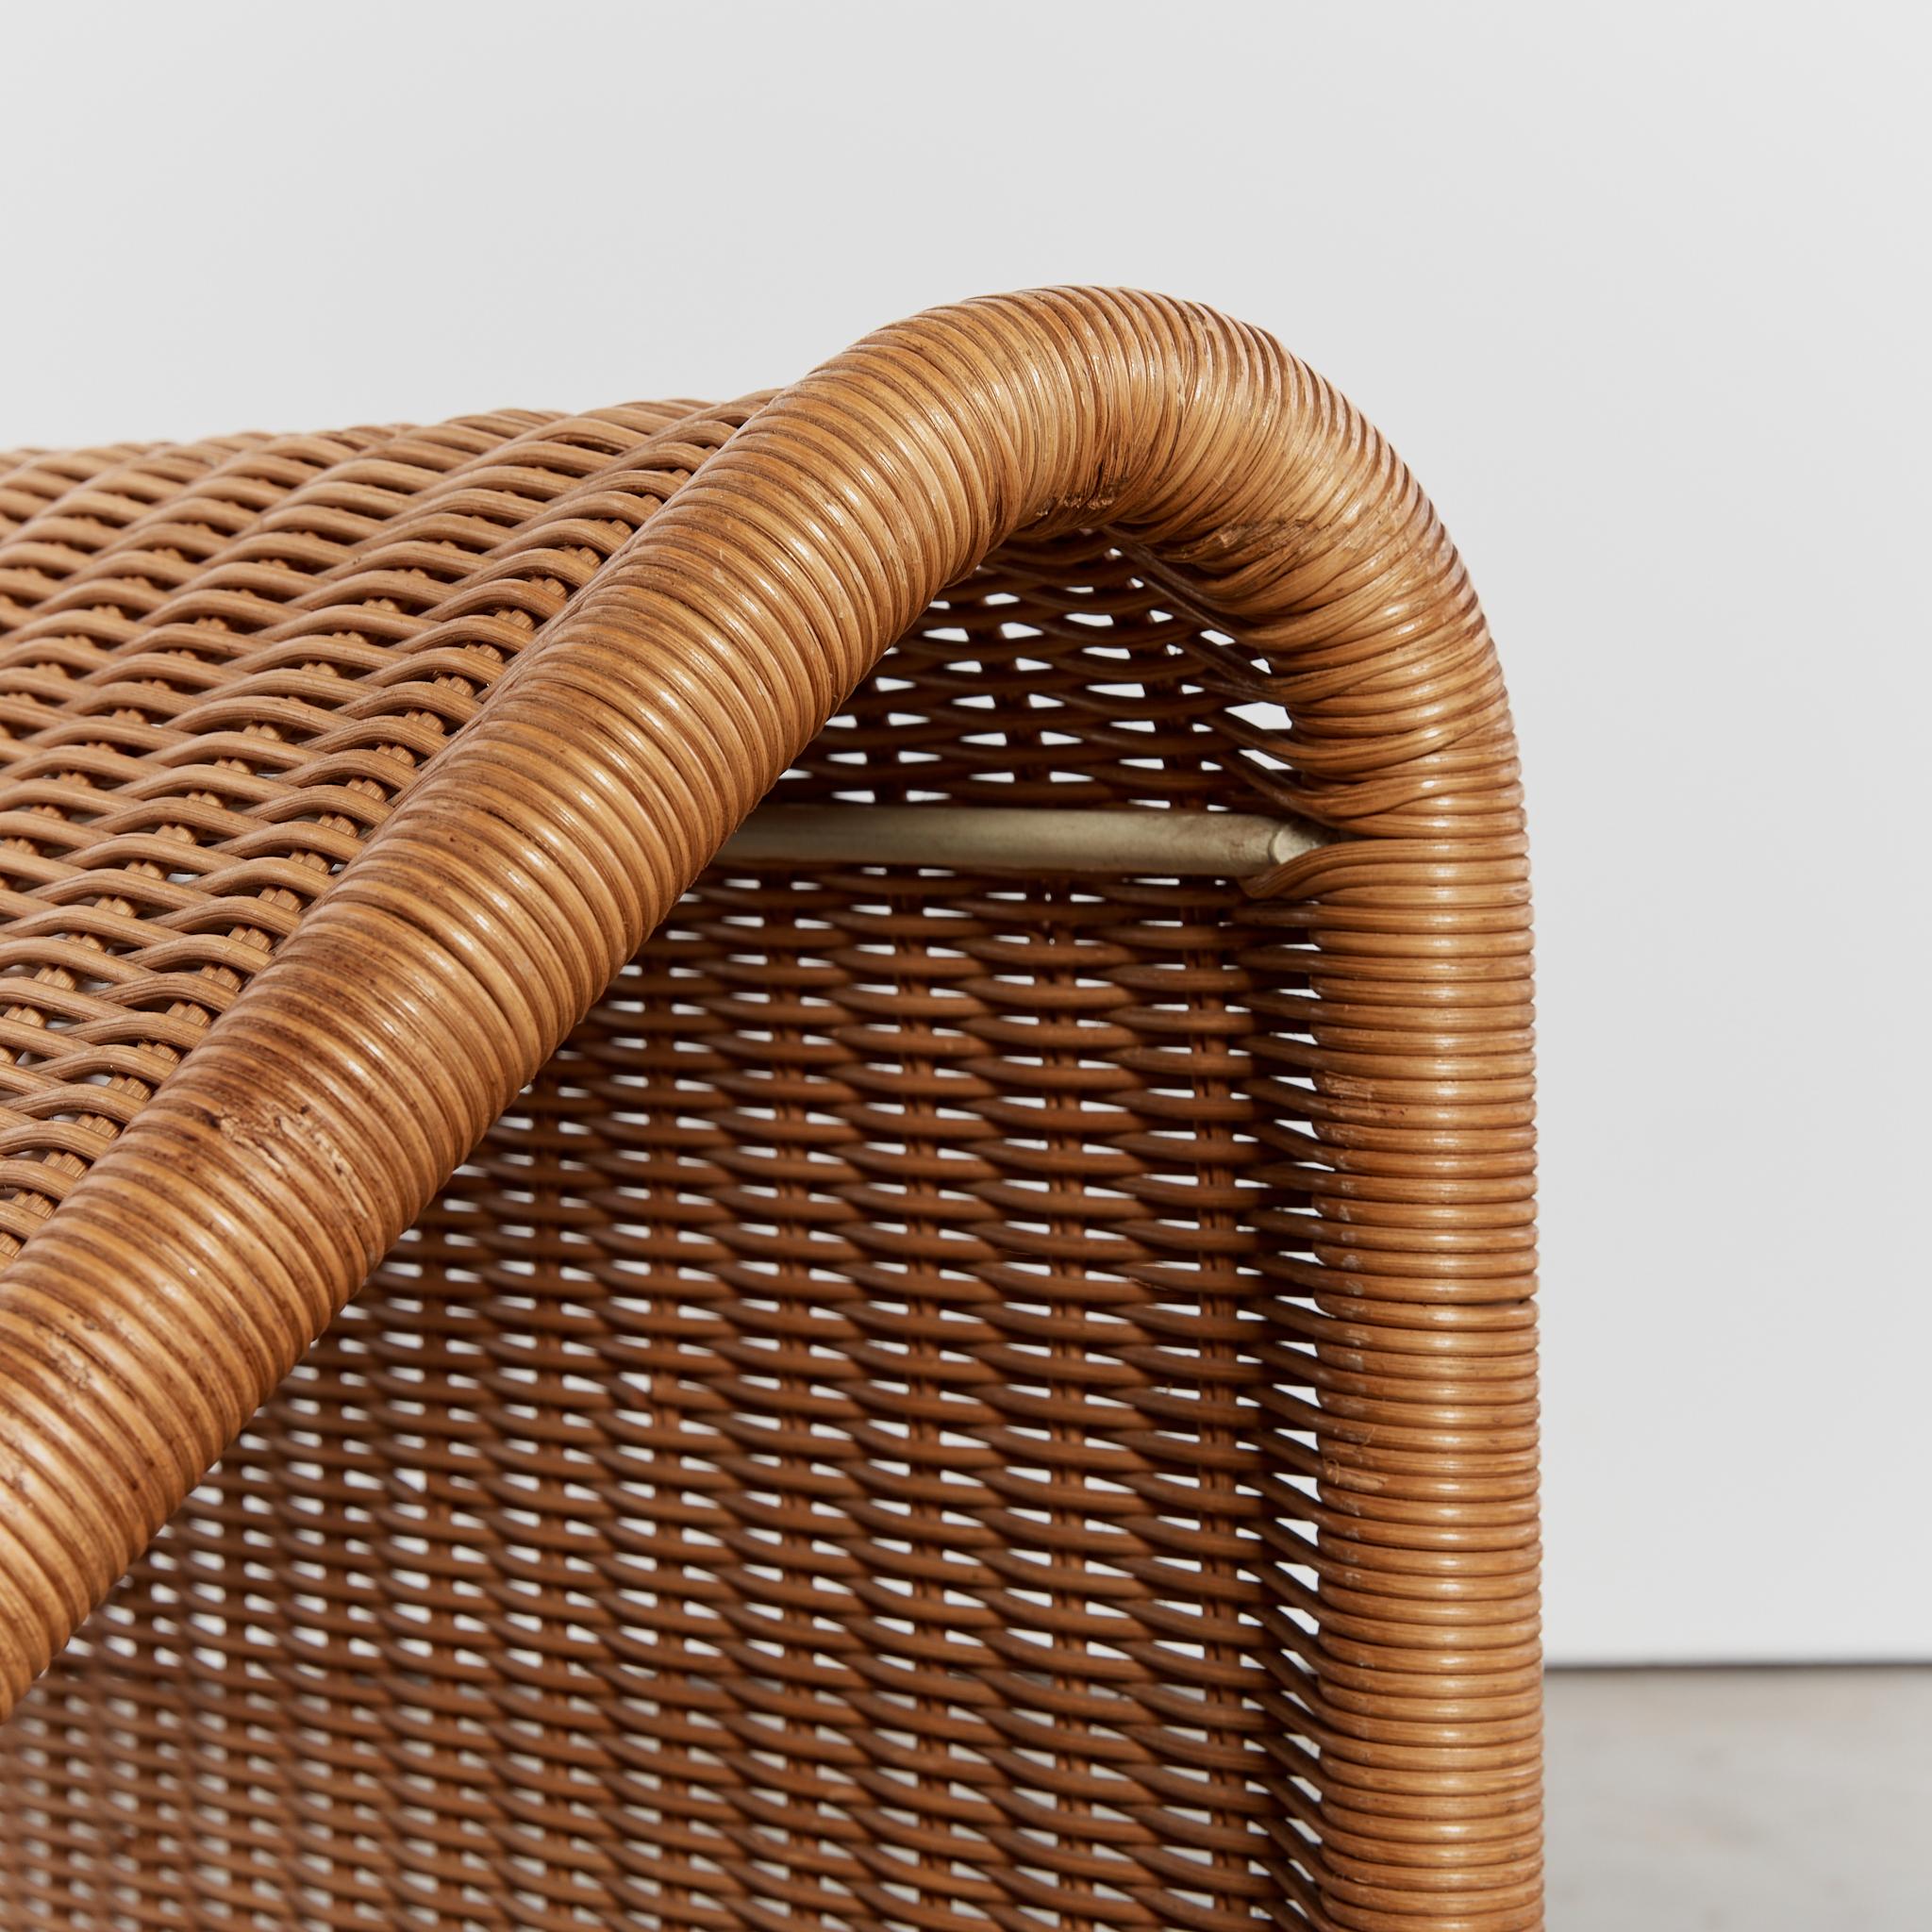 Rare P3 rattan chaise lounge chair by Tito Agnoli for Bocacina 1960's For Sale 6